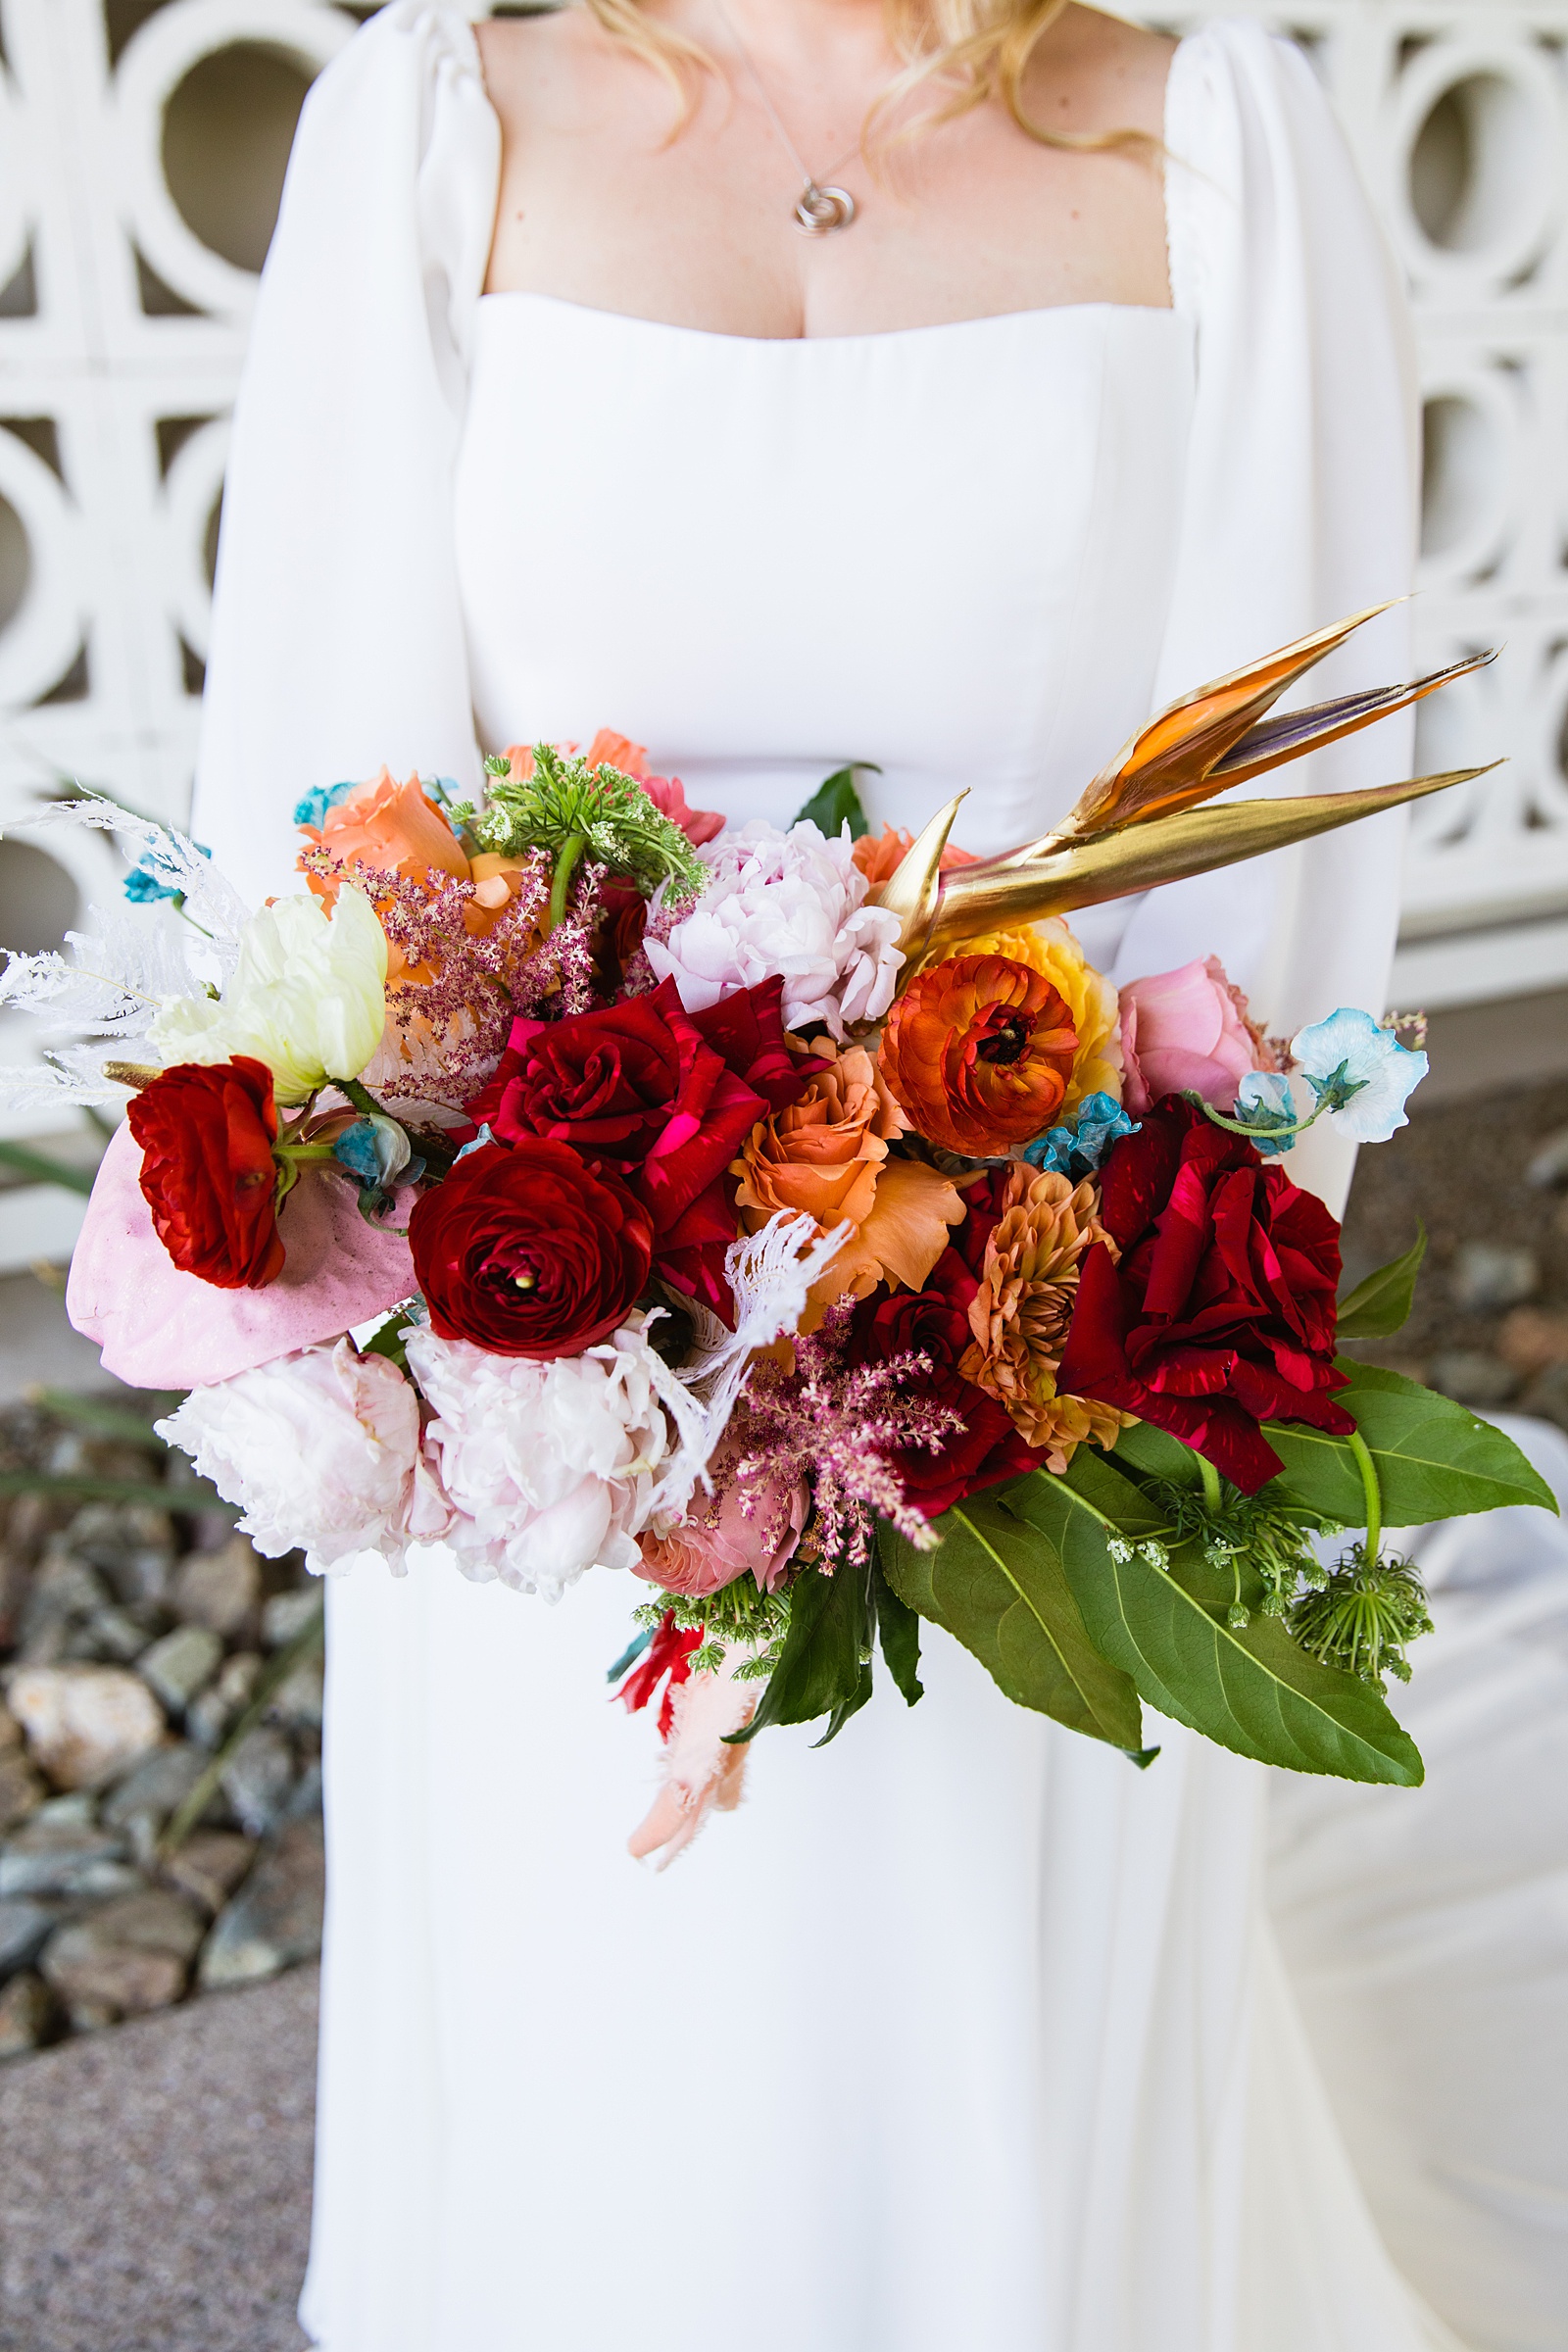 Bride's bright and bold bouquet by PMA Photography.